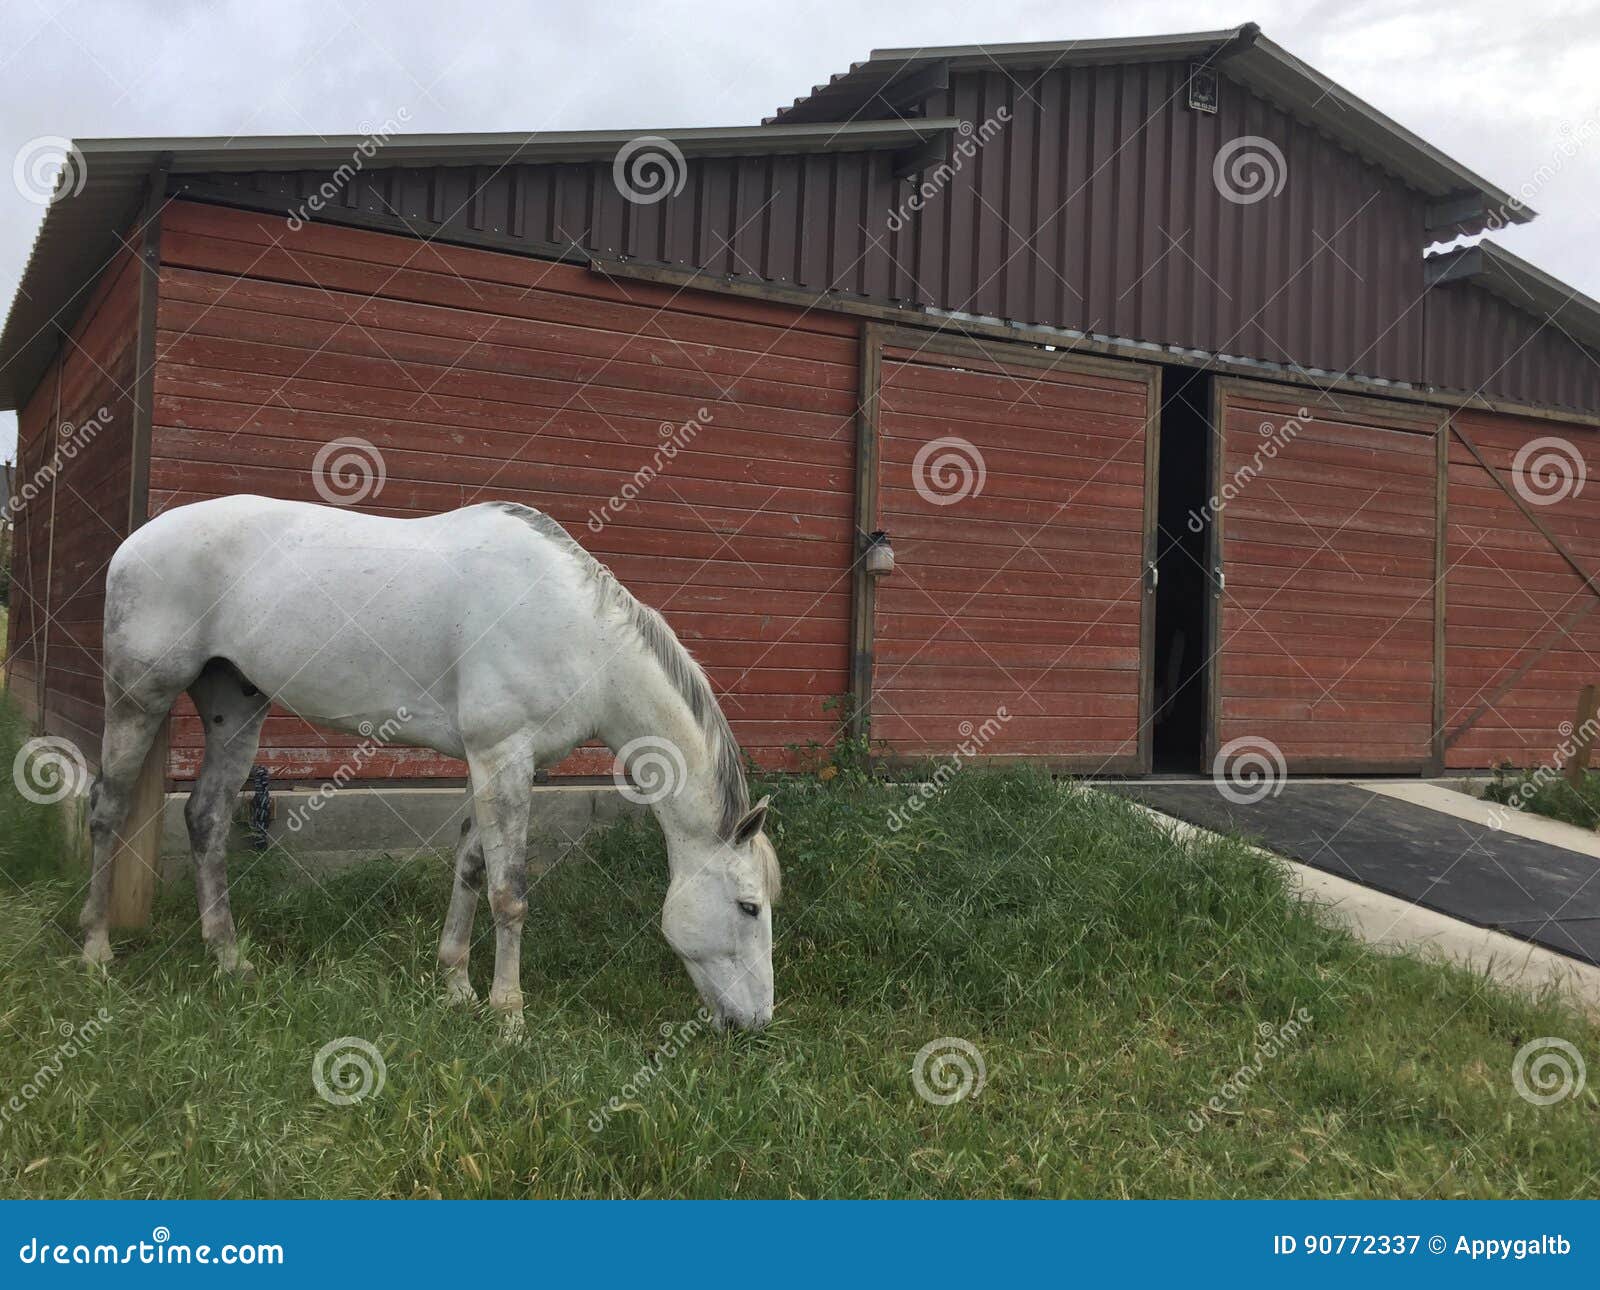 gray horse grazing on lush spring grass in front of picturesque barn